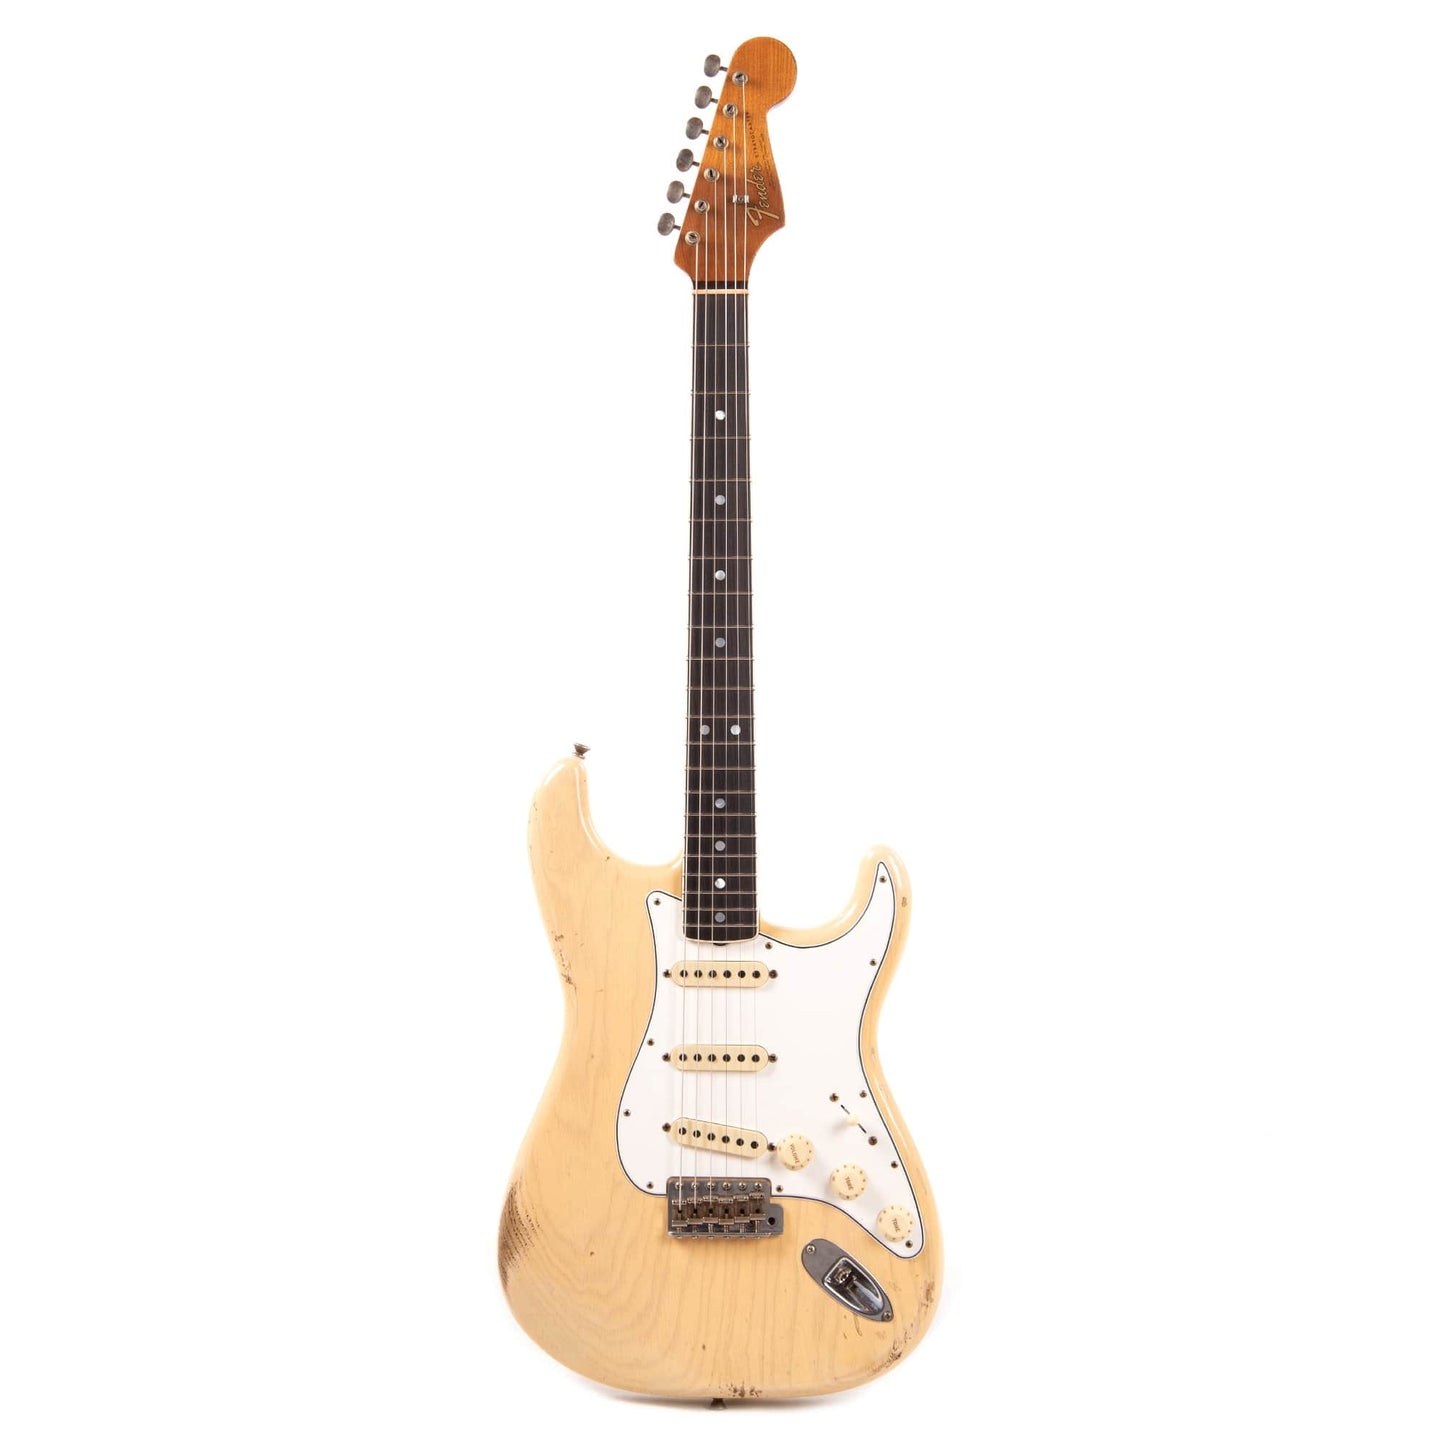 Fender Custom Shop 1965 Stratocaster "Chicago Special" Ash Relic Aged Vintage Blonde w/Roasted Bound Neck Electric Guitars / Solid Body